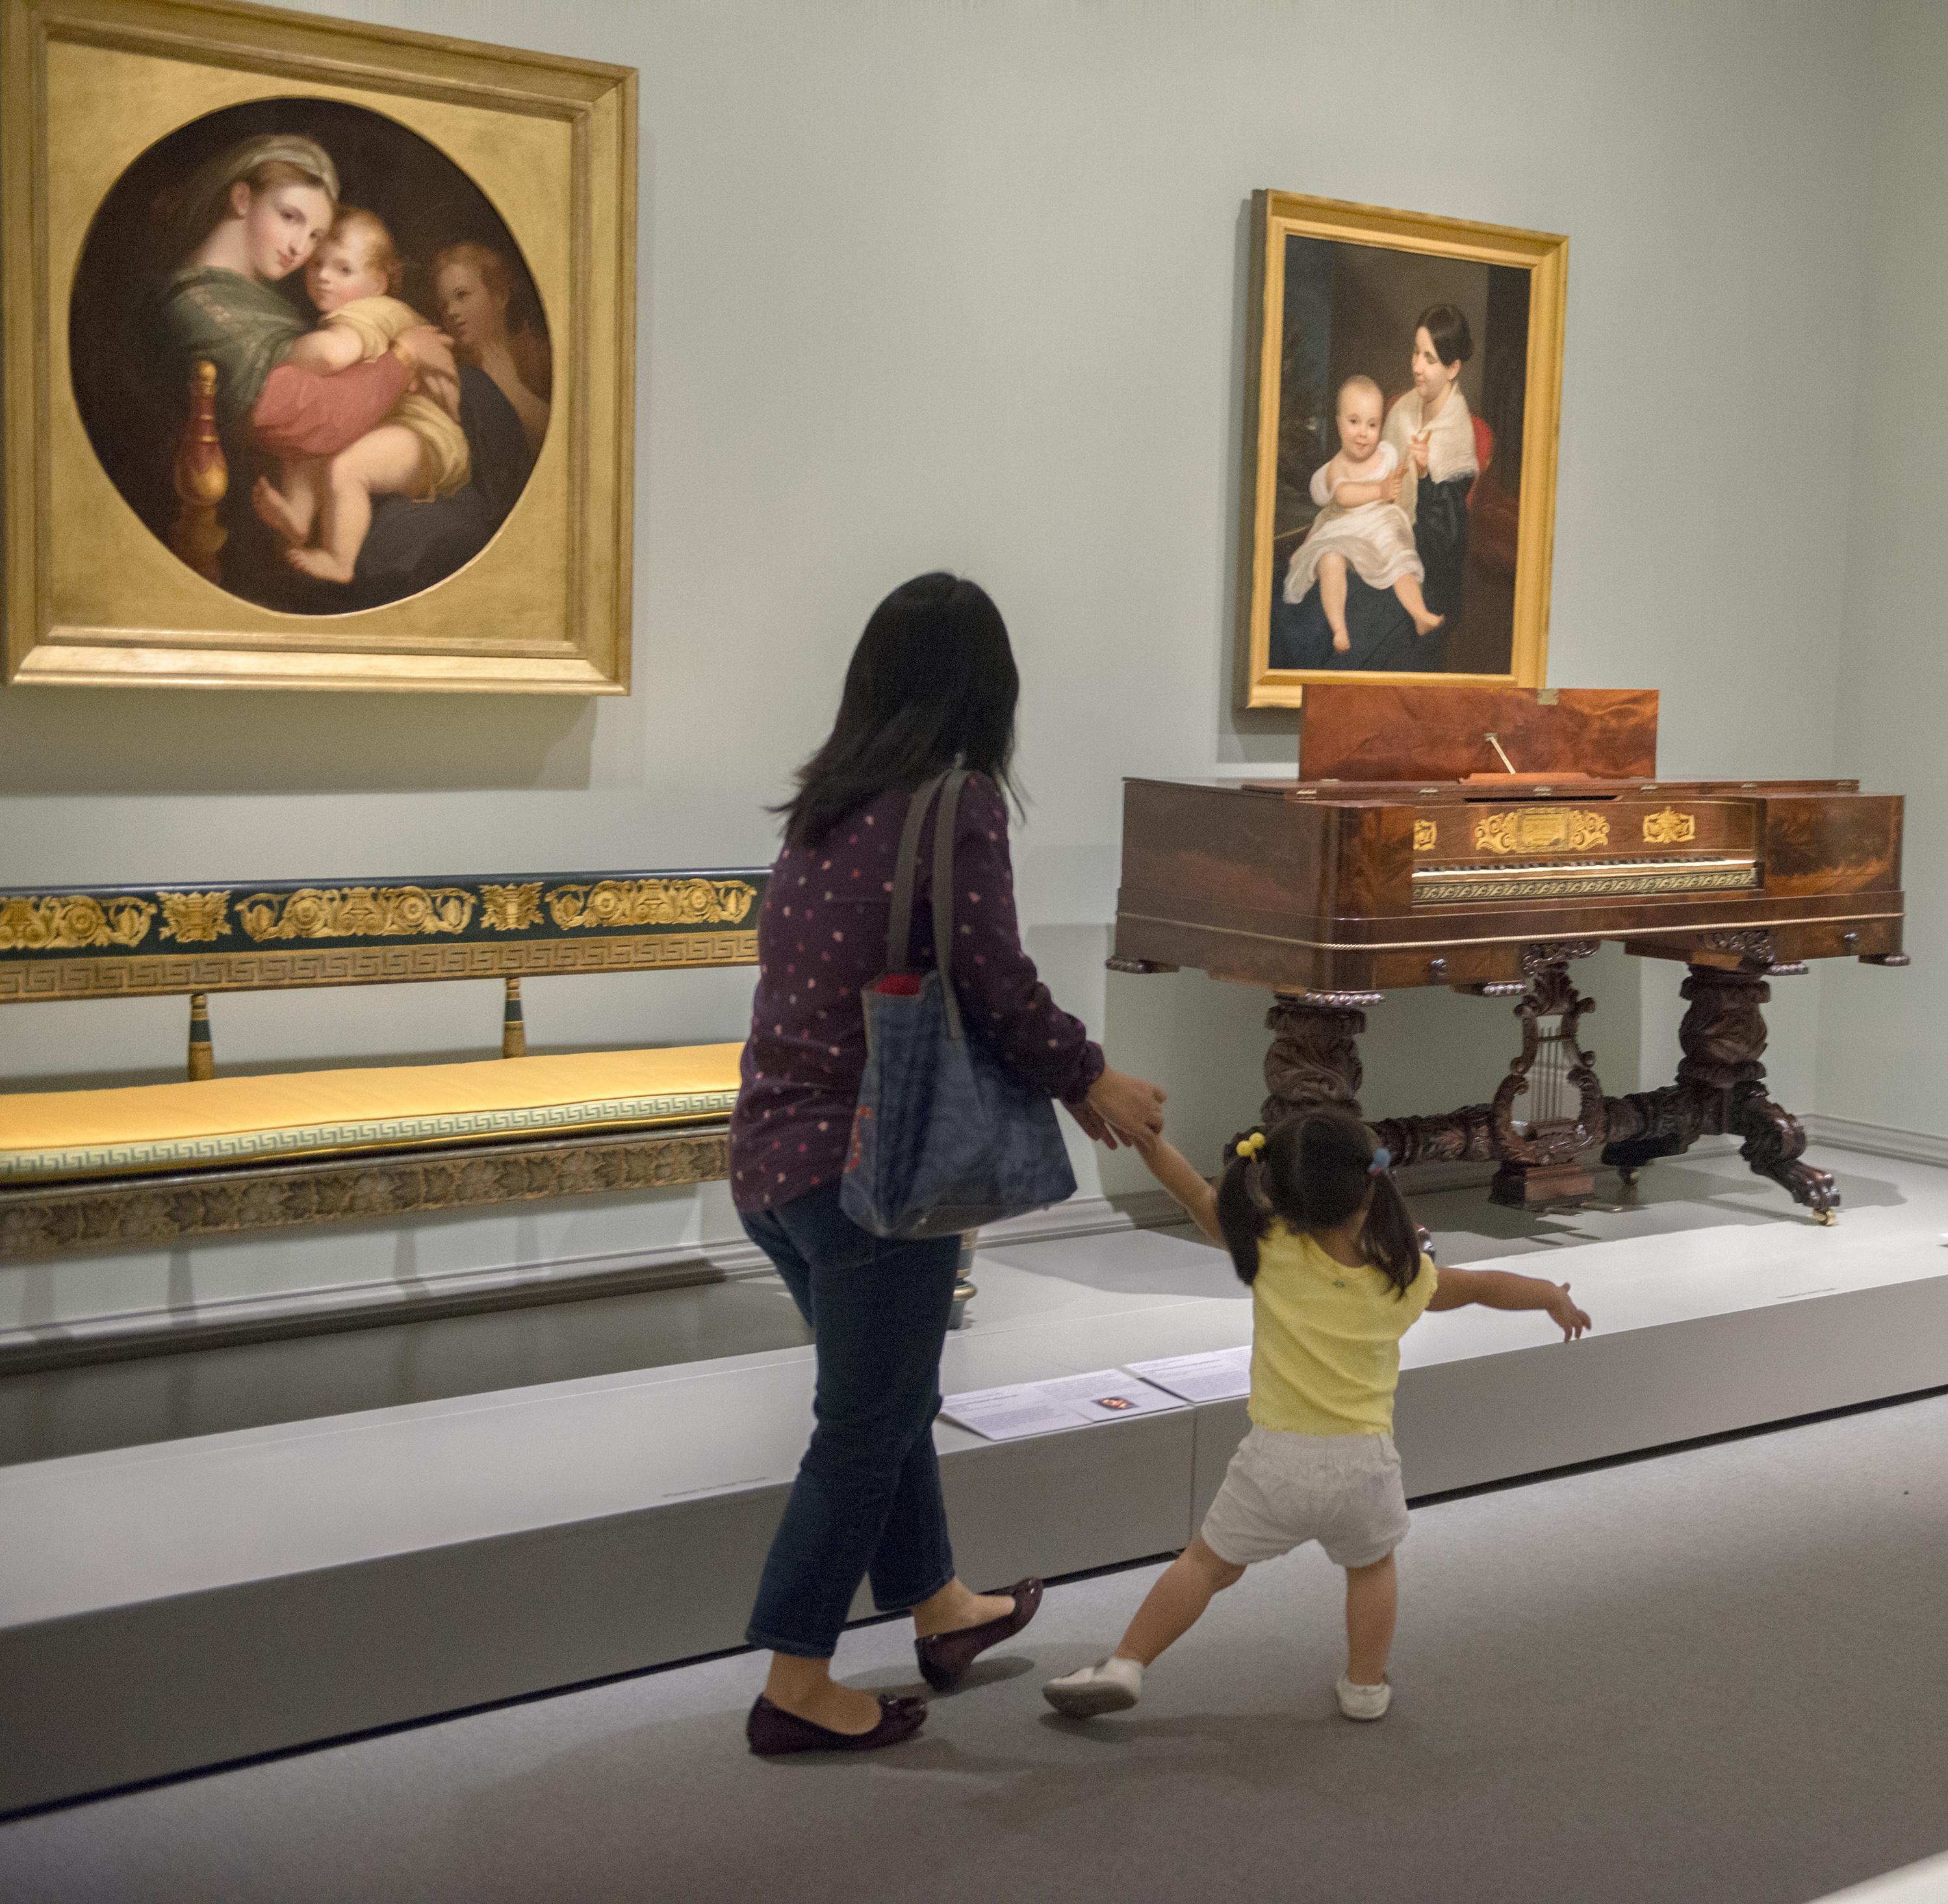 Child and parent moving in gallery with art of people and furniture